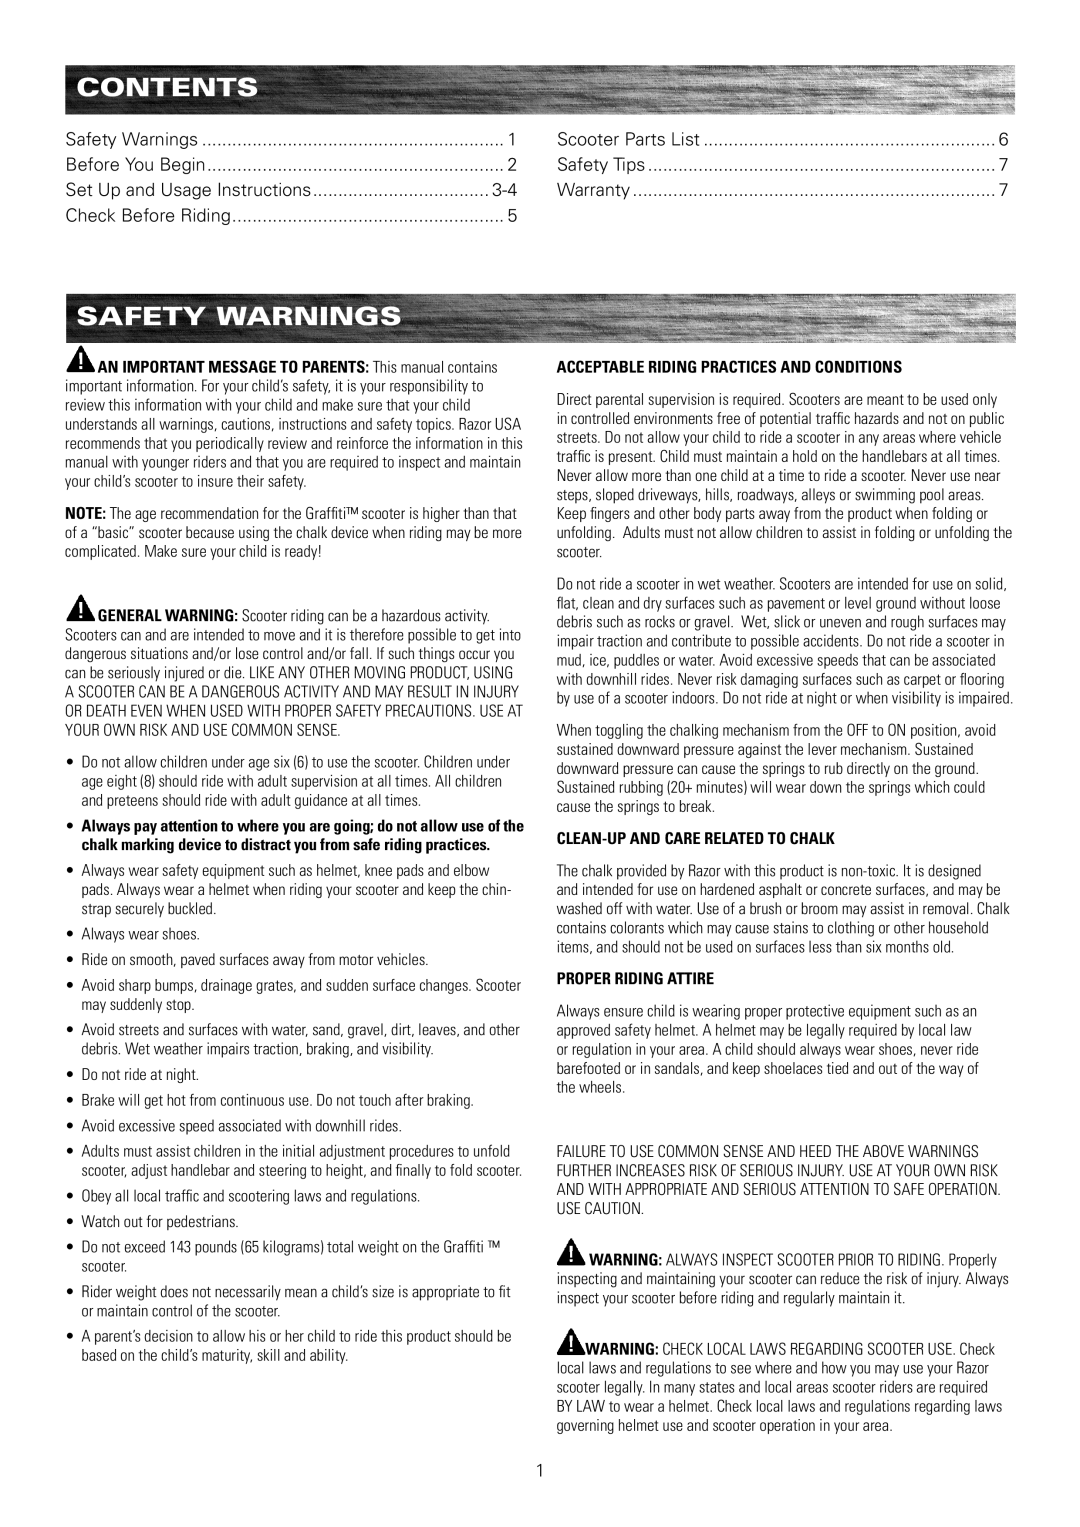 Razor 13010840 Contents, Safety Warnings, Acceptable Riding Practices And Conditions, Clean-Up And Care Related To Chalk 